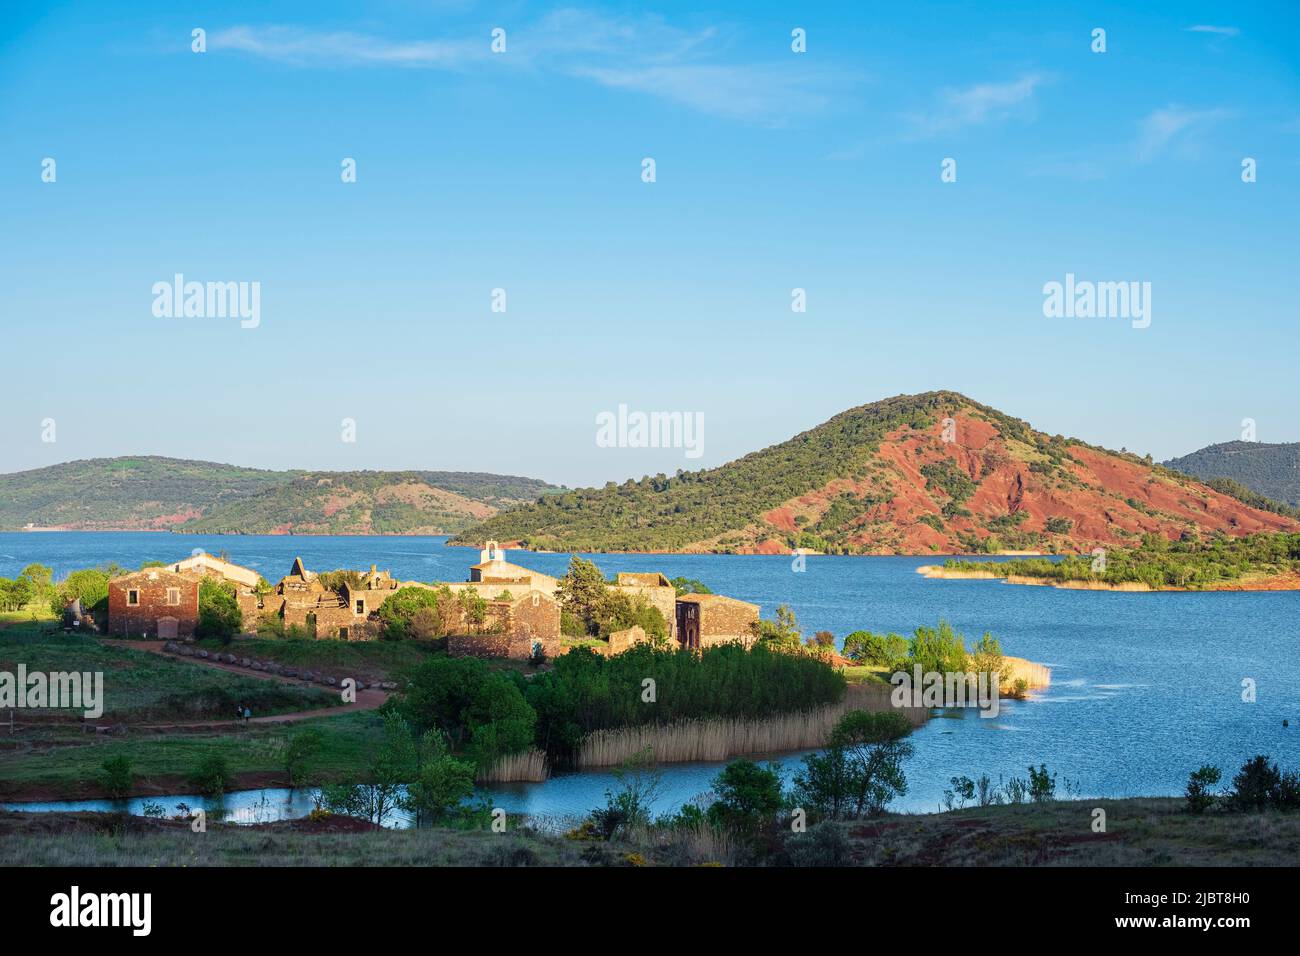 France, Herault, Celles, little village on the banks of Salagou lake Stock Photo